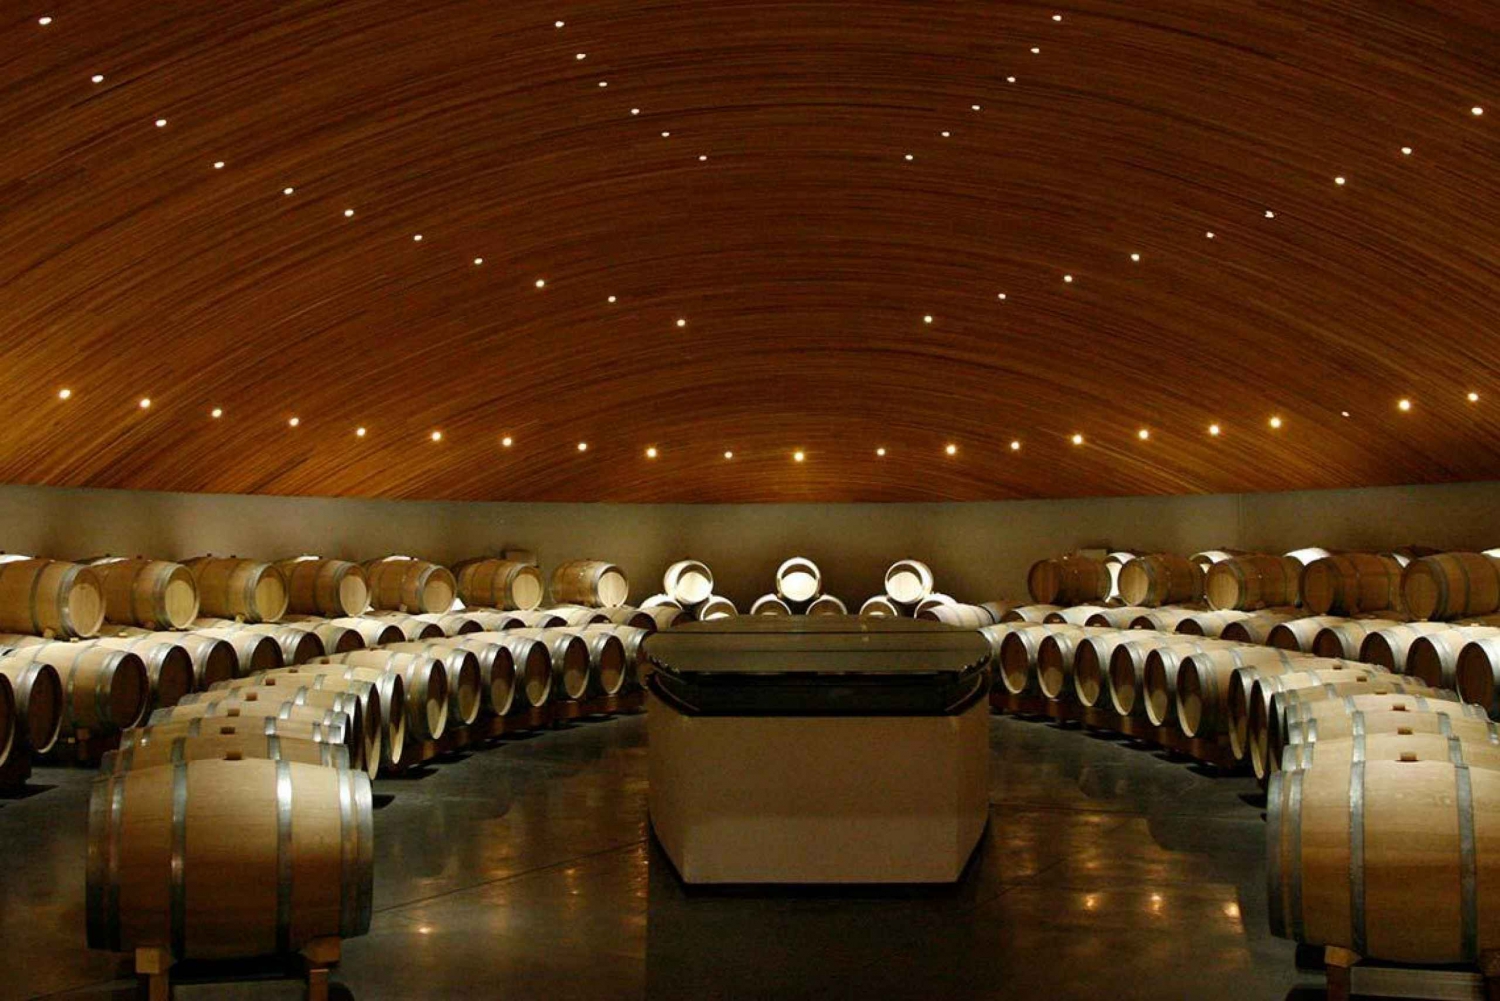 Full Day Colchagua Private Luxury 3 Wineries